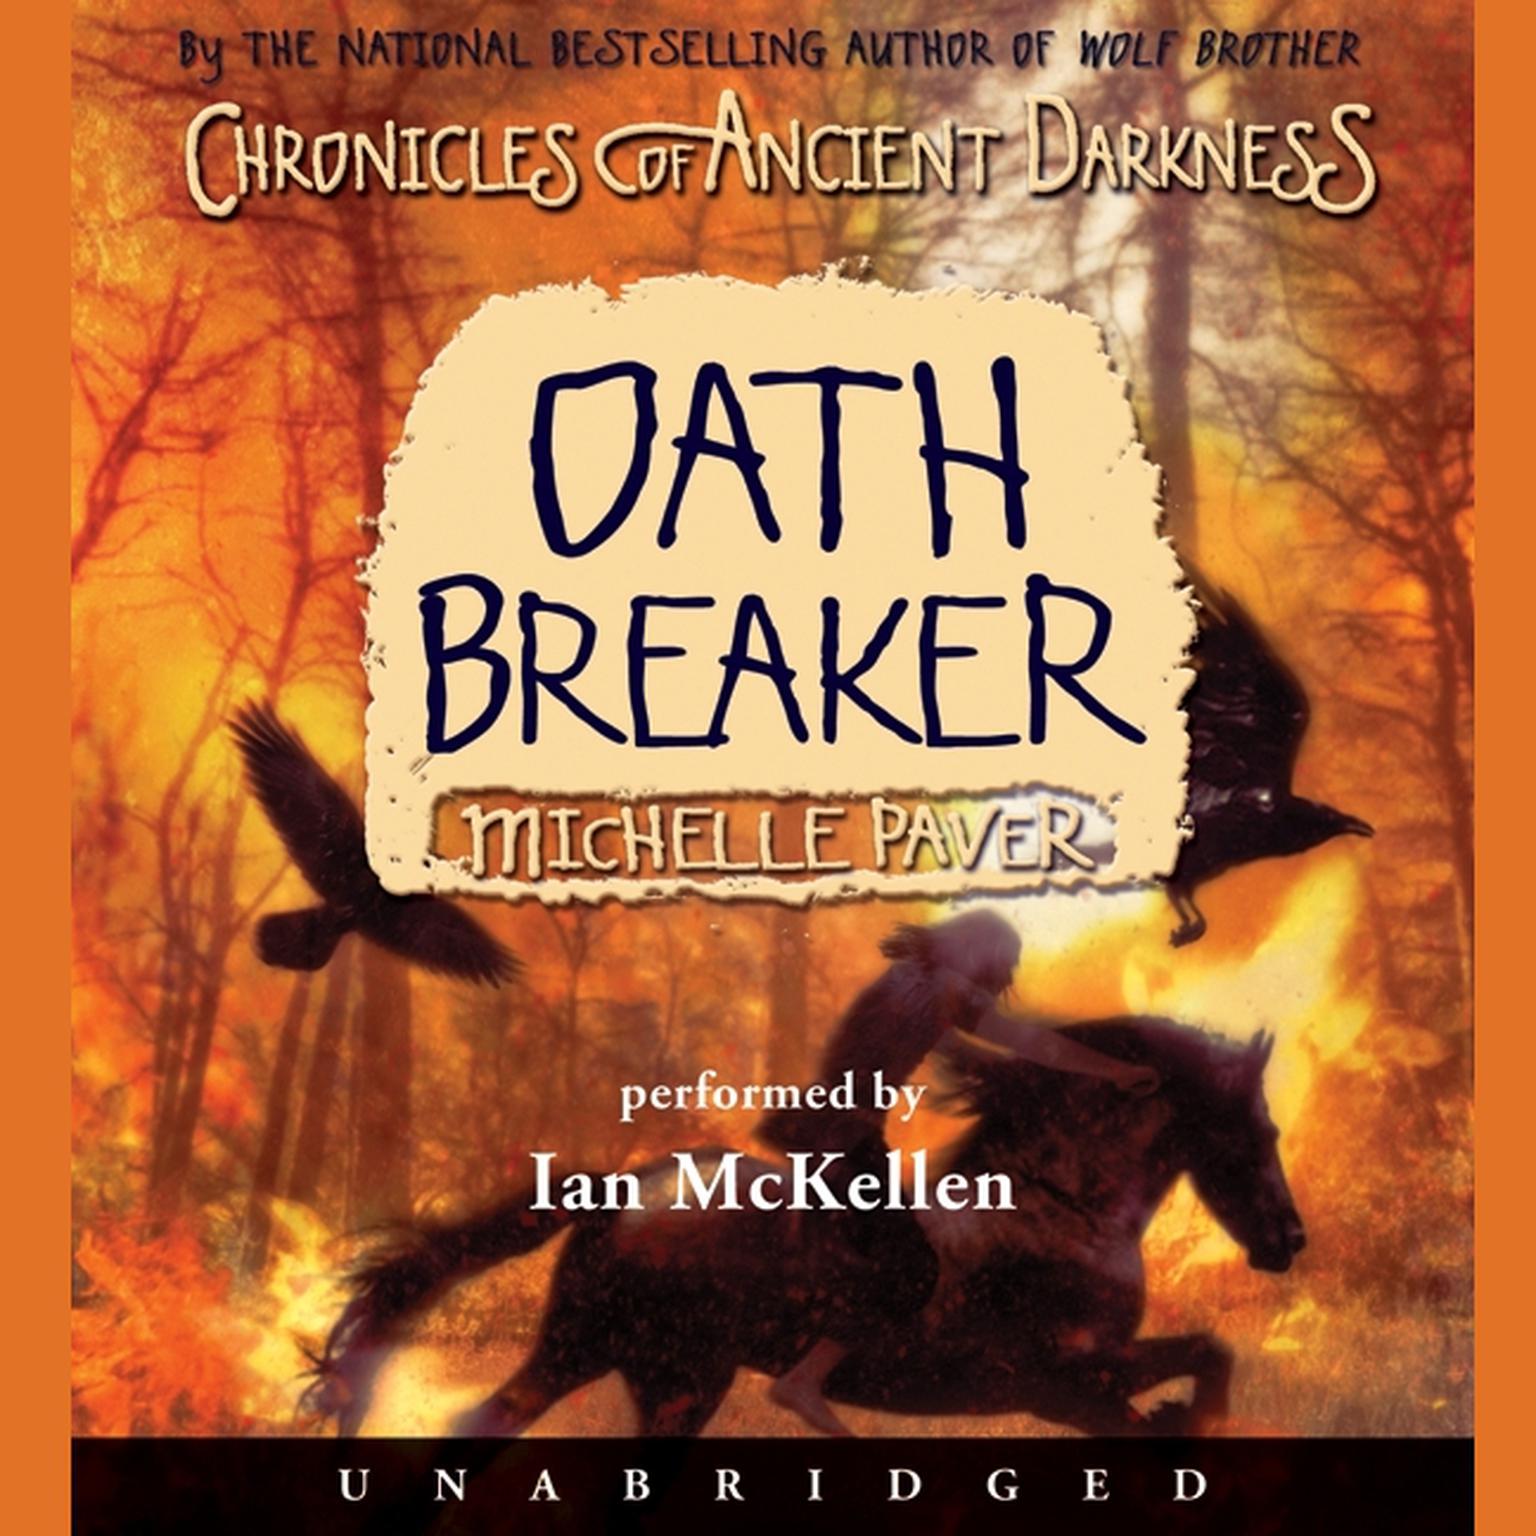 Chronicles of Ancient Darkness #5: Oath Breaker Audiobook, by Michelle Paver